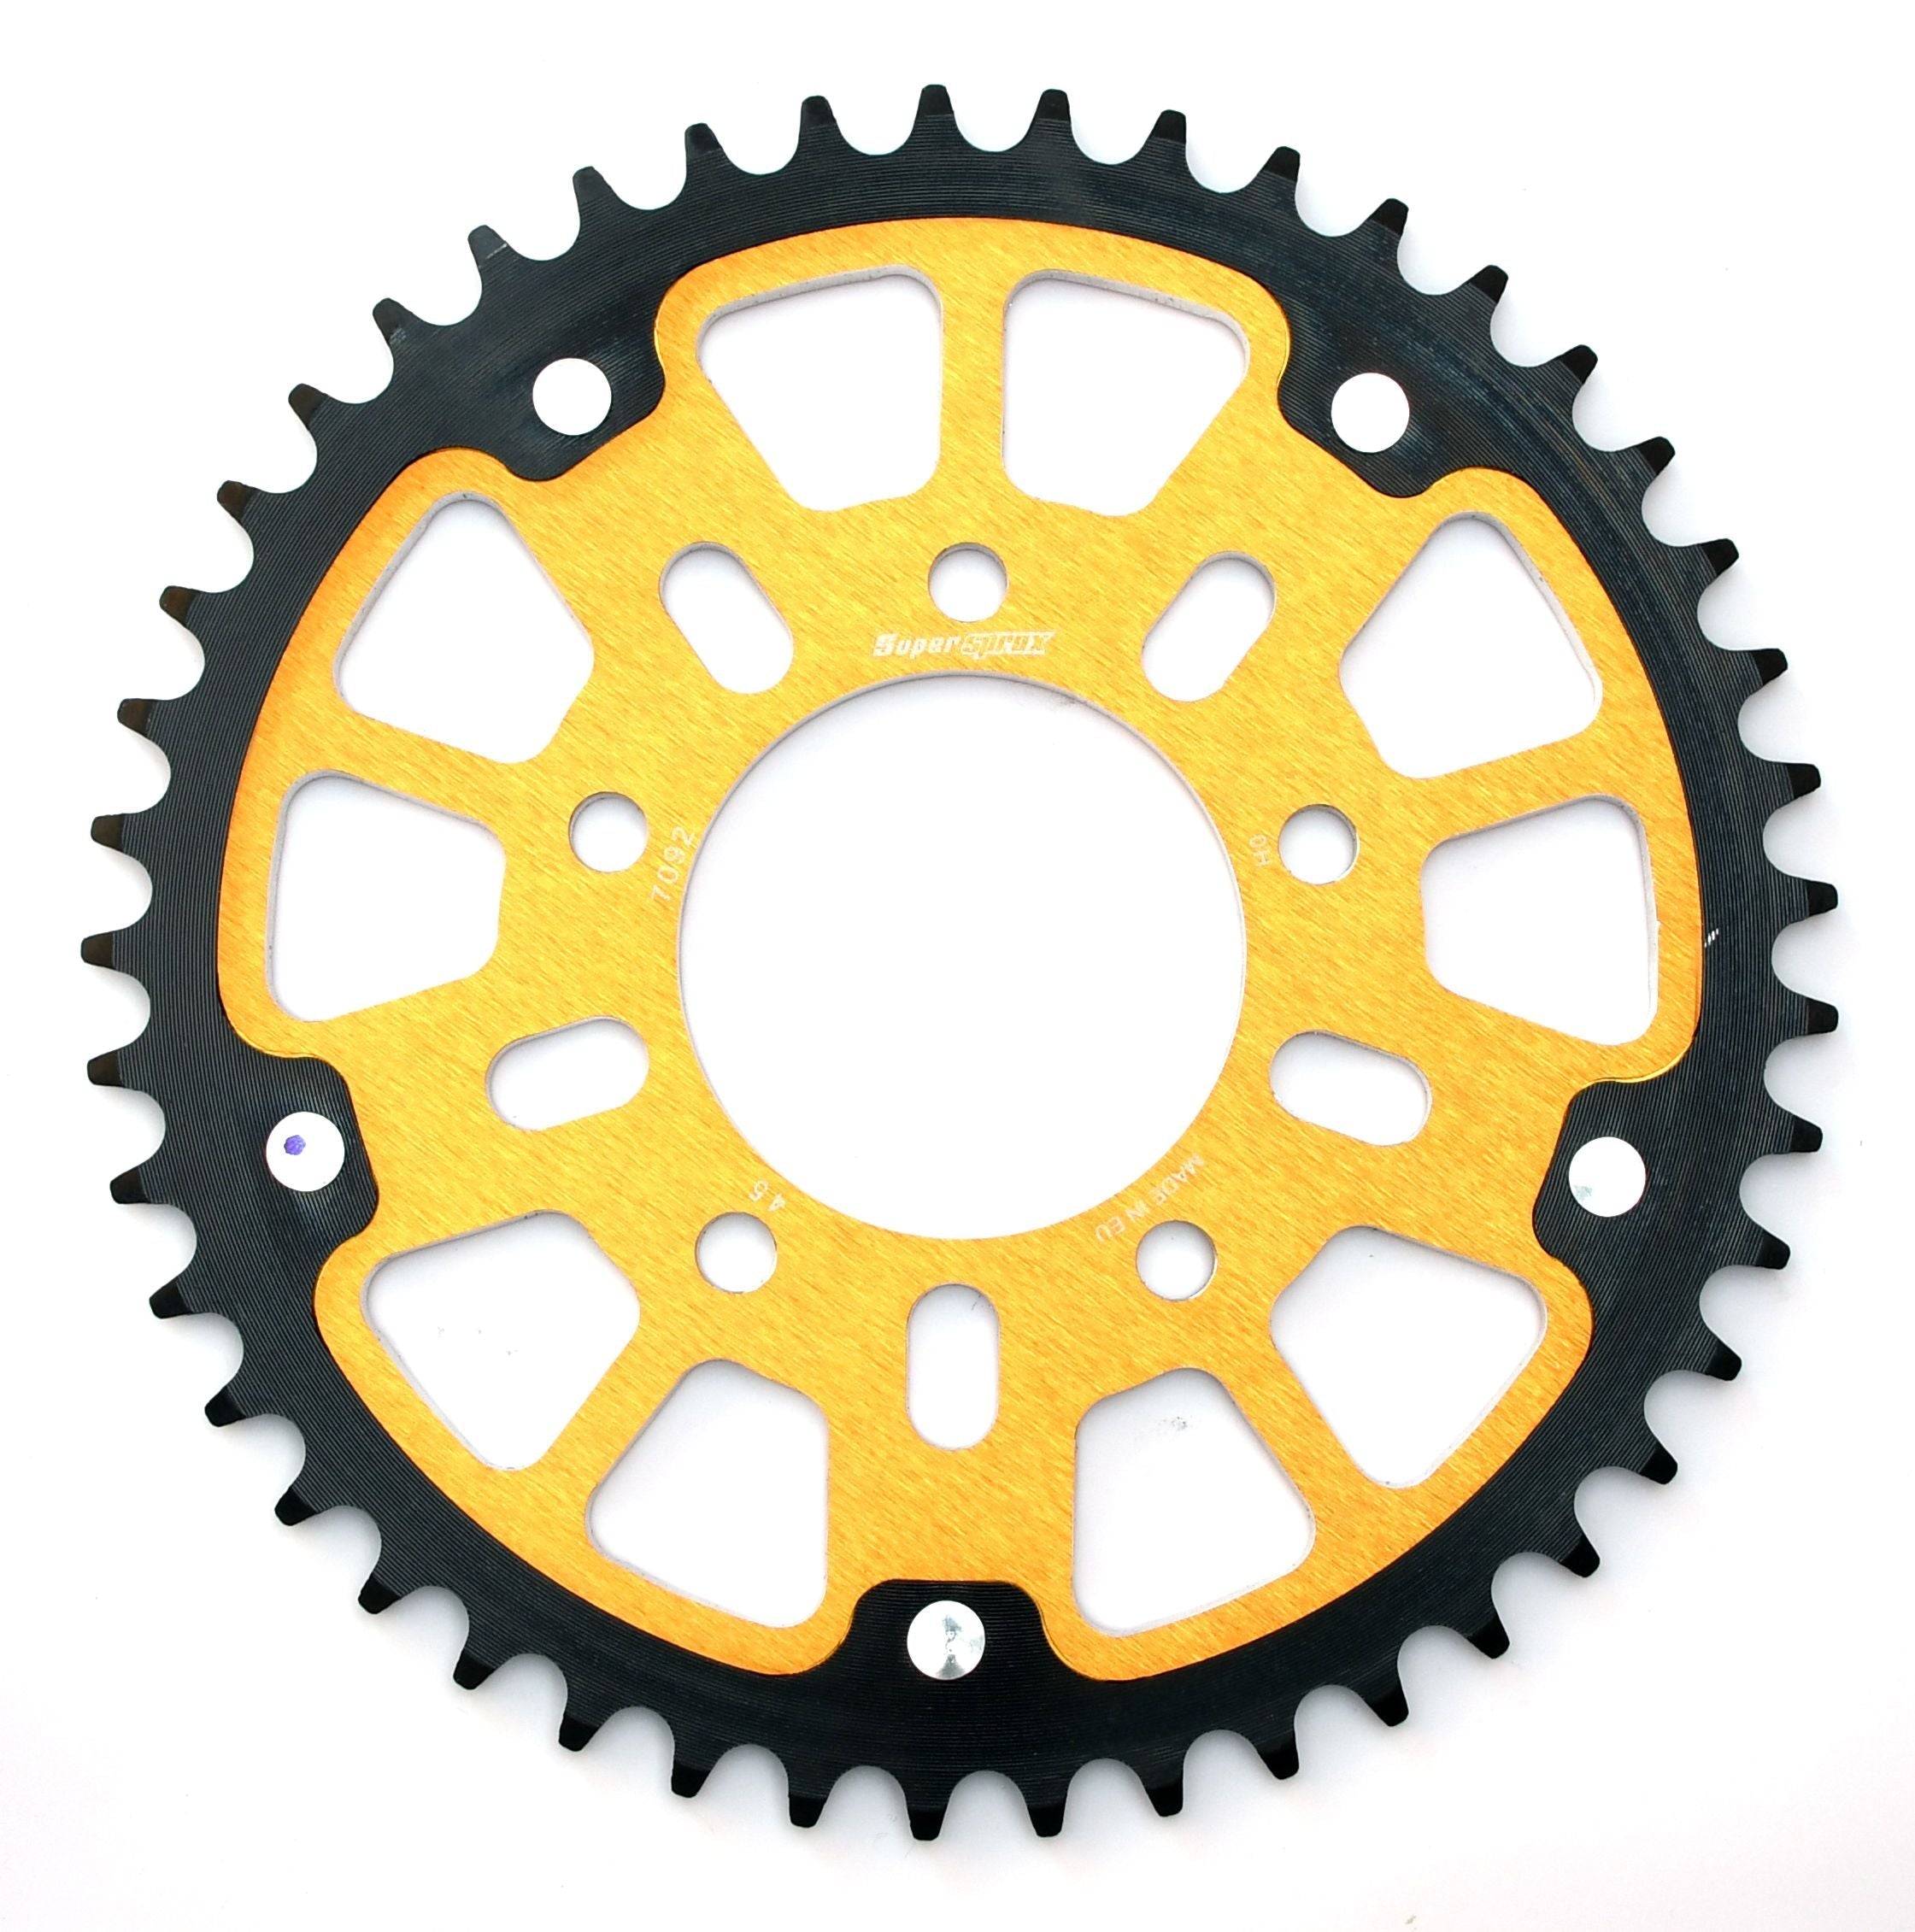 Supersprox Stealth 525 Pitch Rear Sprocket RST-7092:48 - (525, 76mm Centre, 100mm PCD)